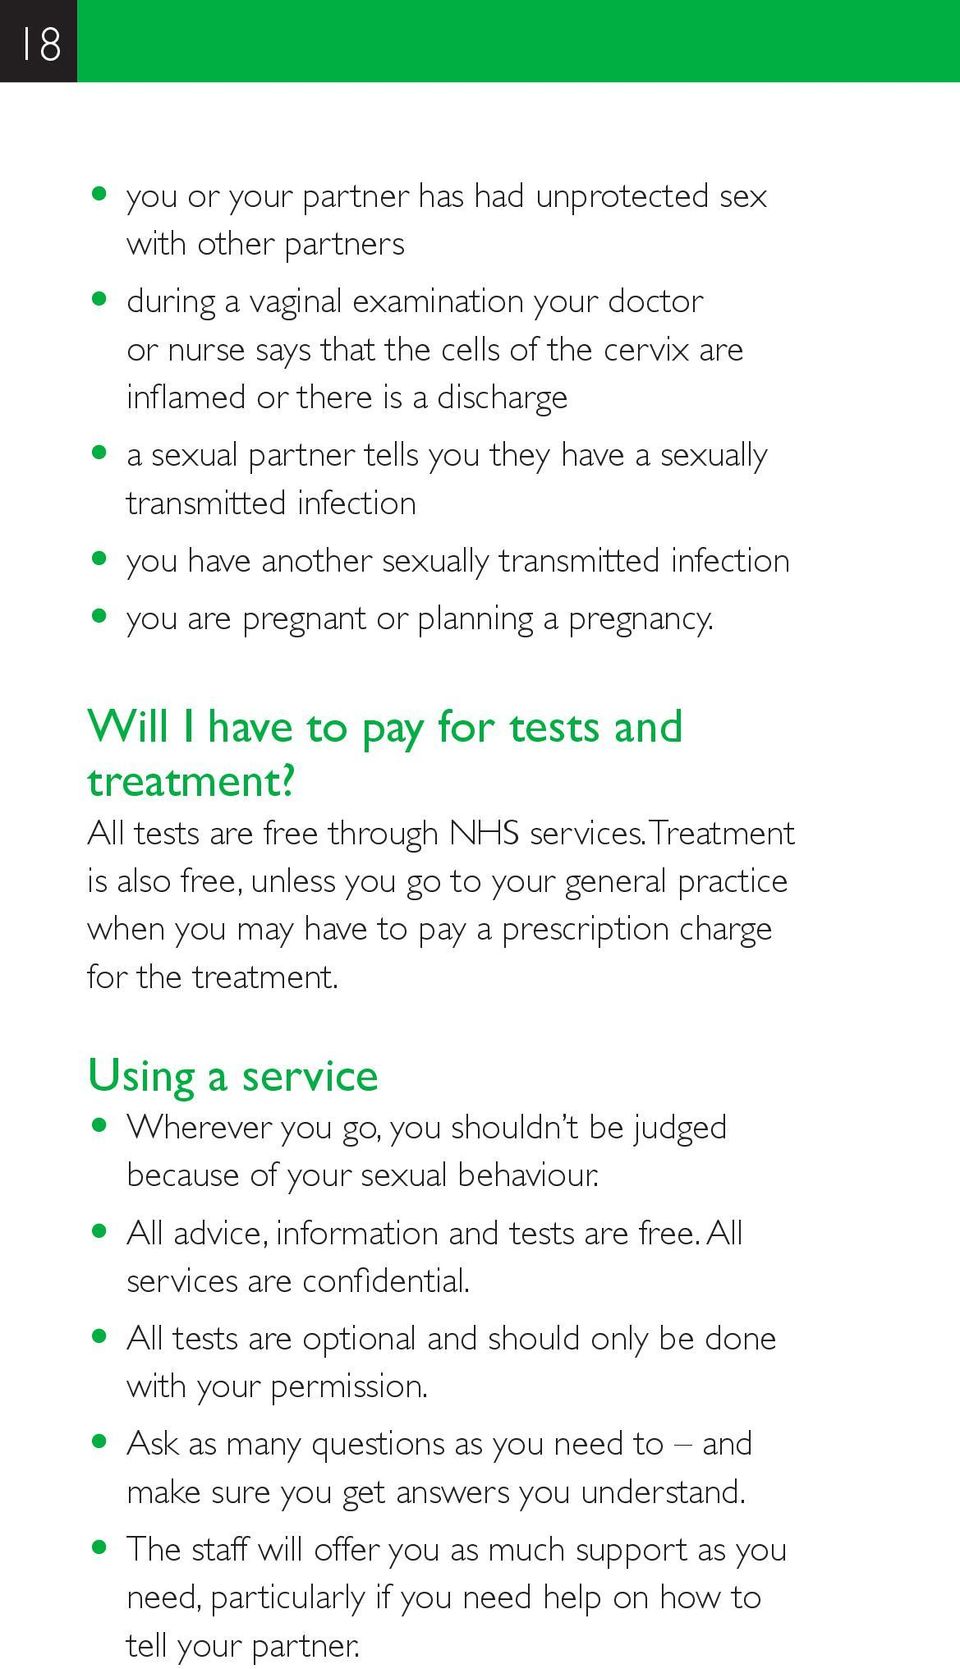 Will I have to pay for tests and treatment? All tests are free through NHS services.